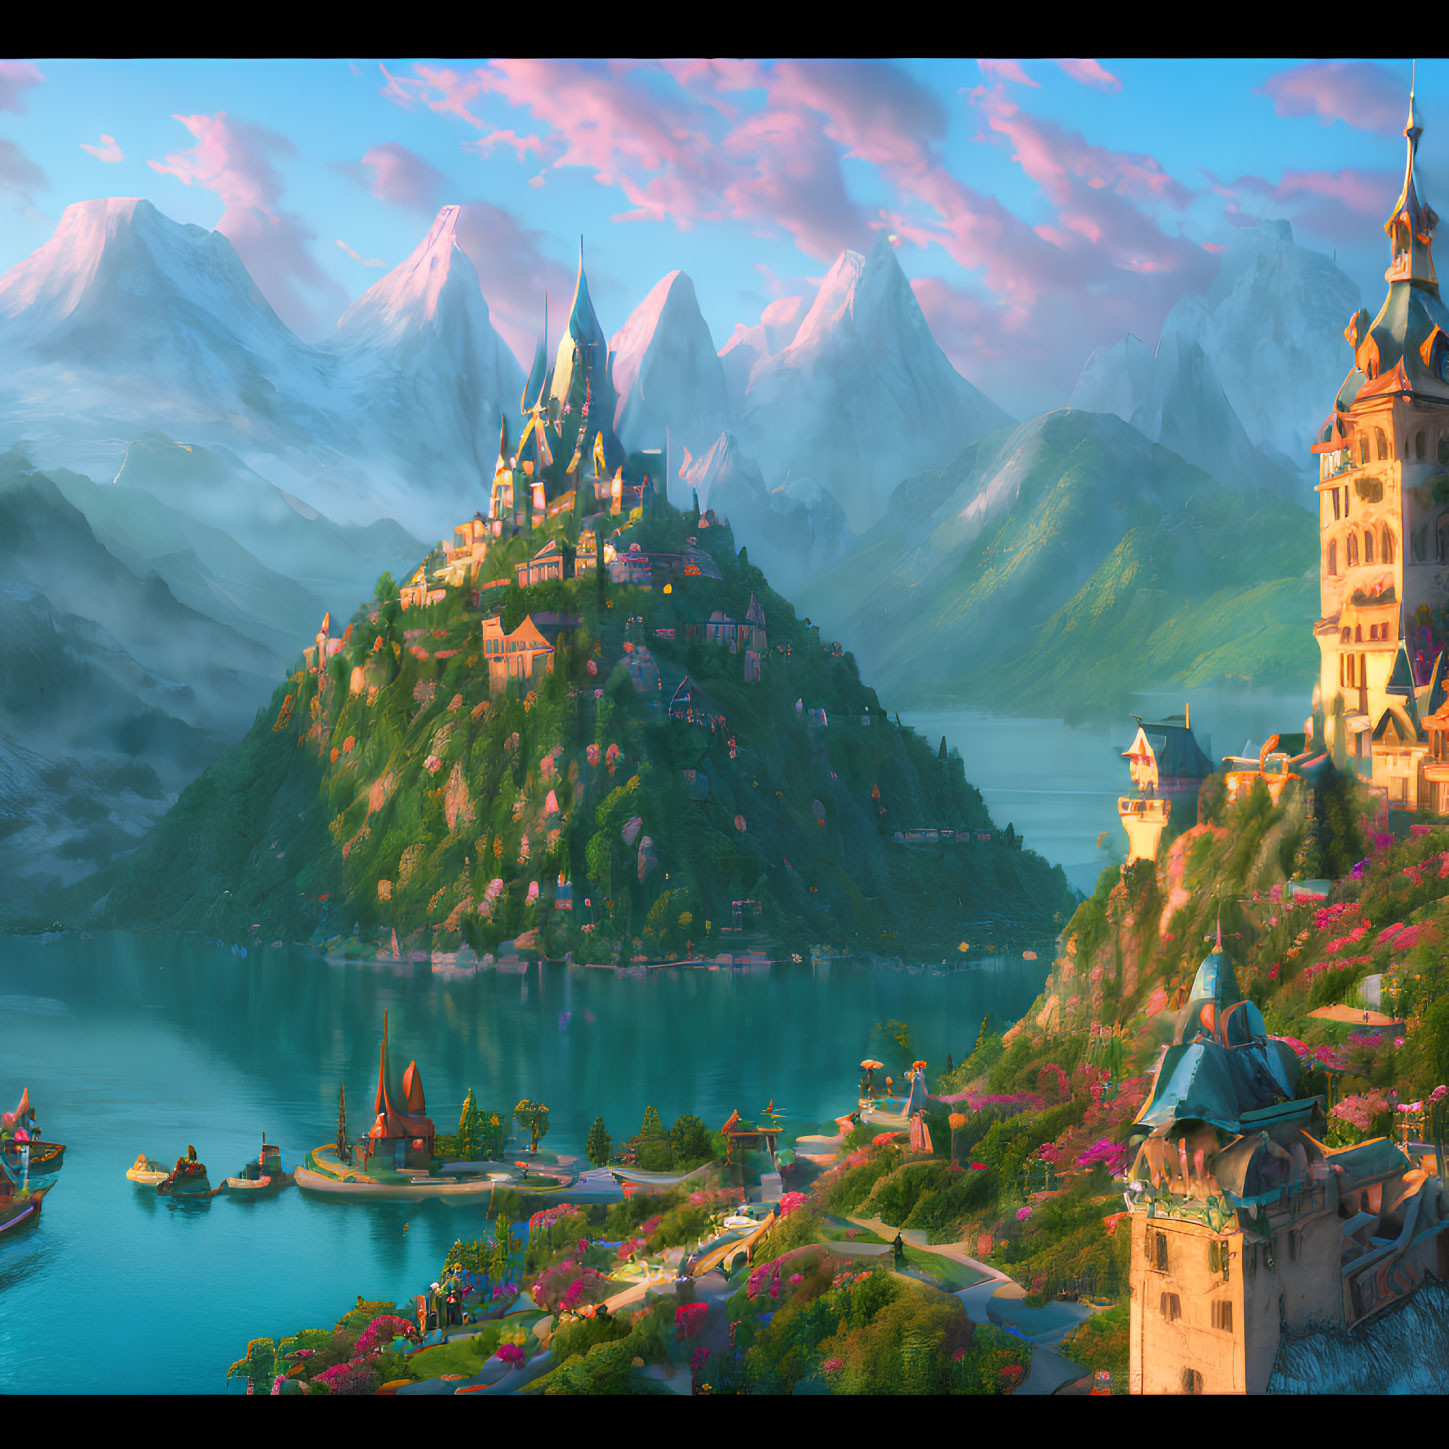 Fantasy landscape with castle, water, boats & snowy mountains